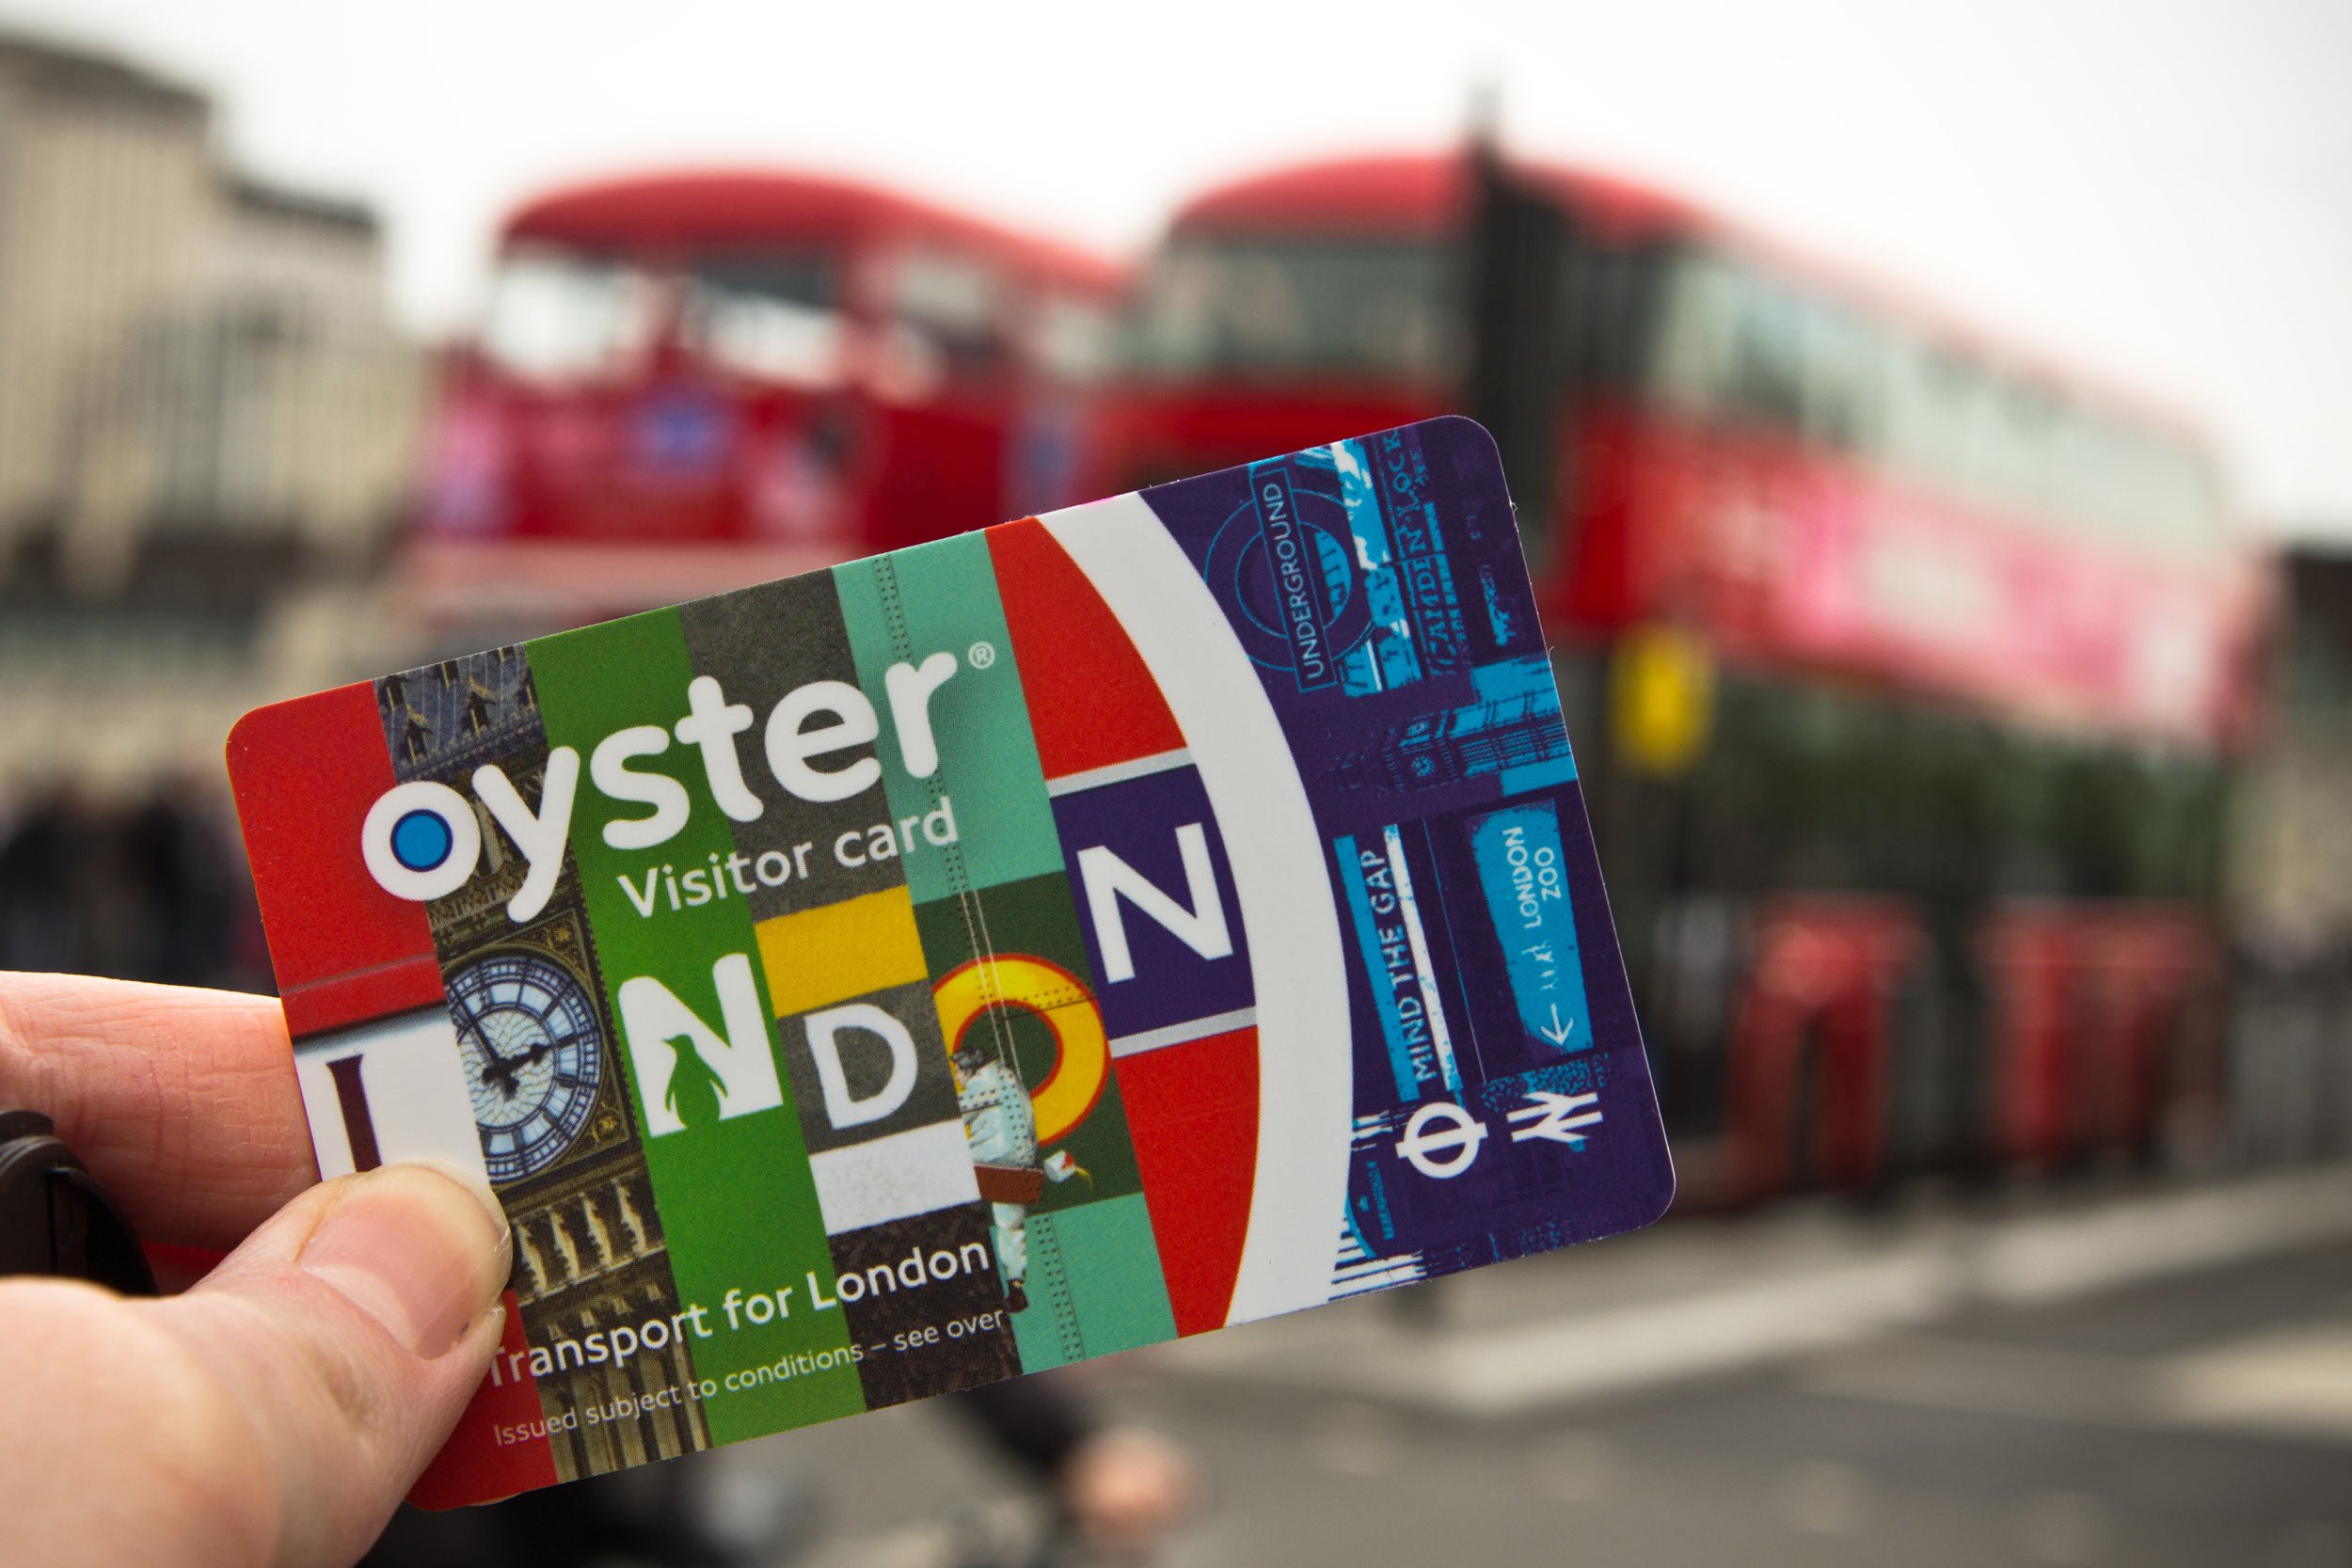 visitor-oyster-card-london